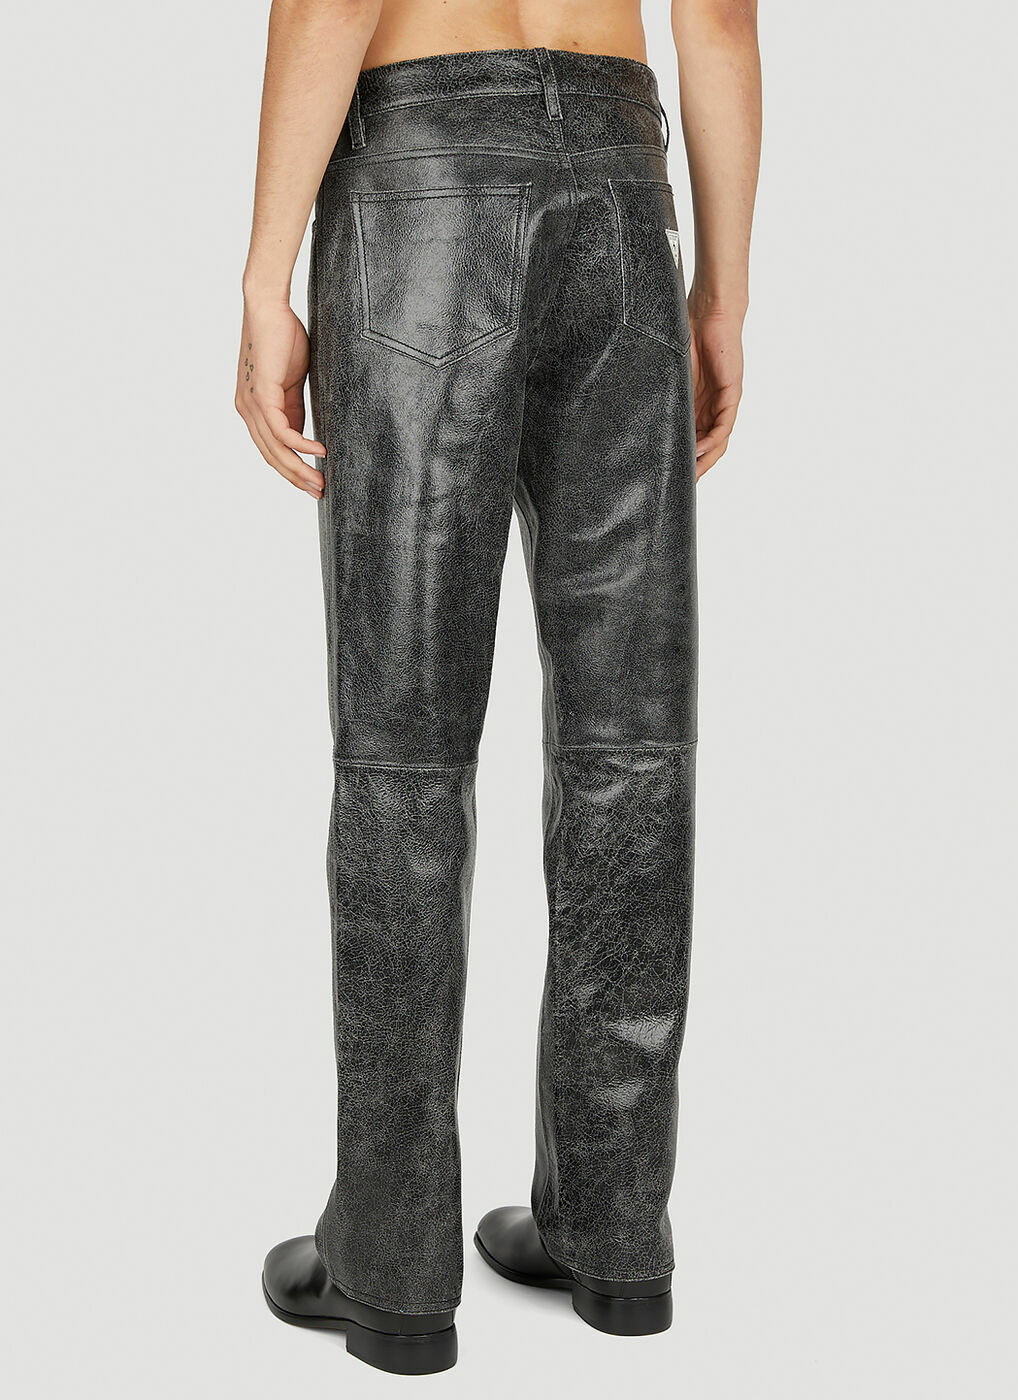 Guess USA - Cracked Leather Pants in Black GUESS